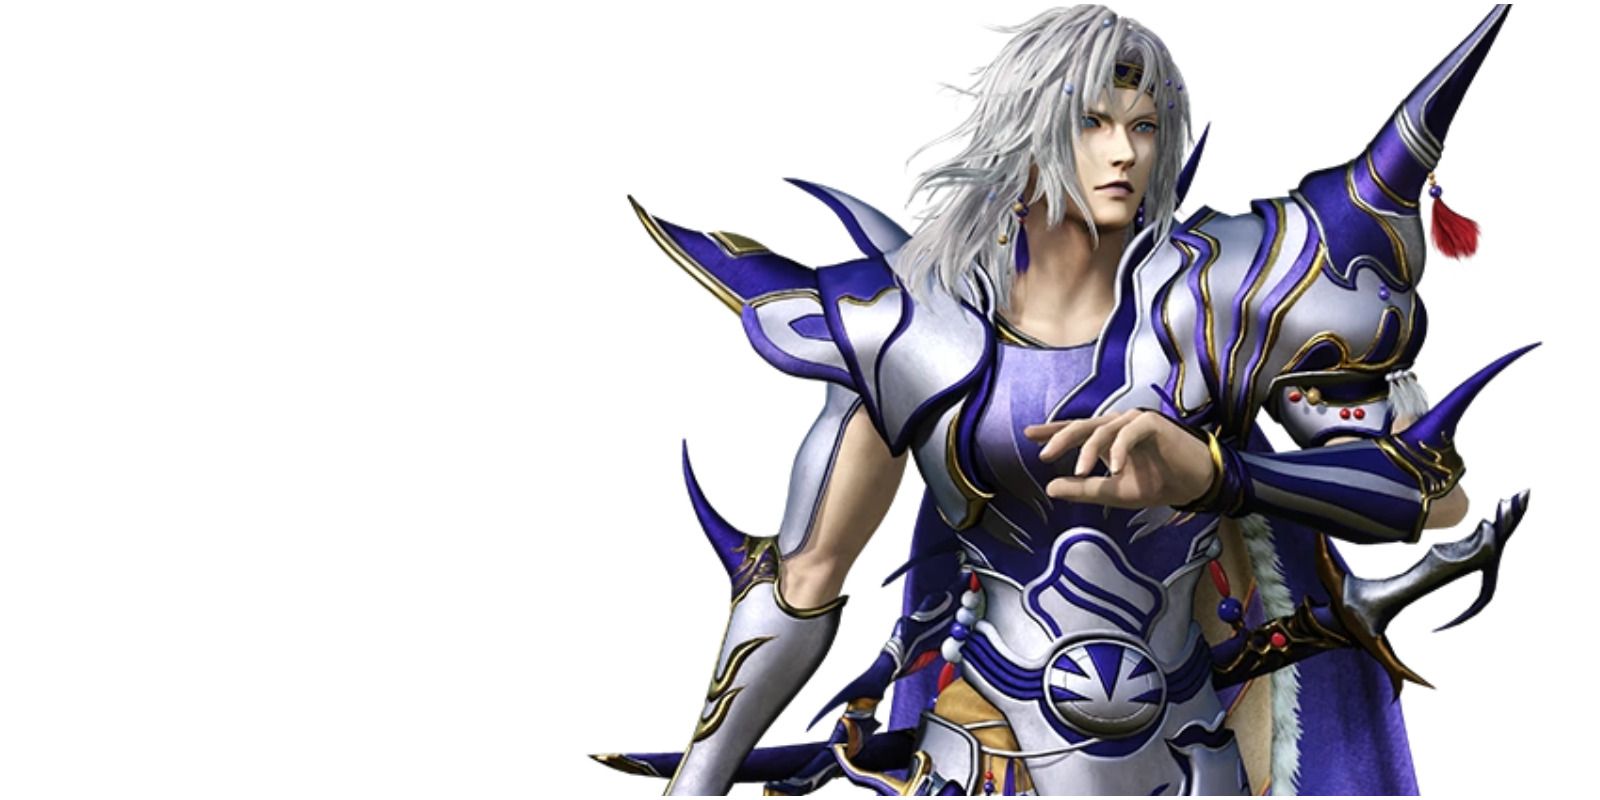 final-fantasy-every-protagonist-ranked-by-likability